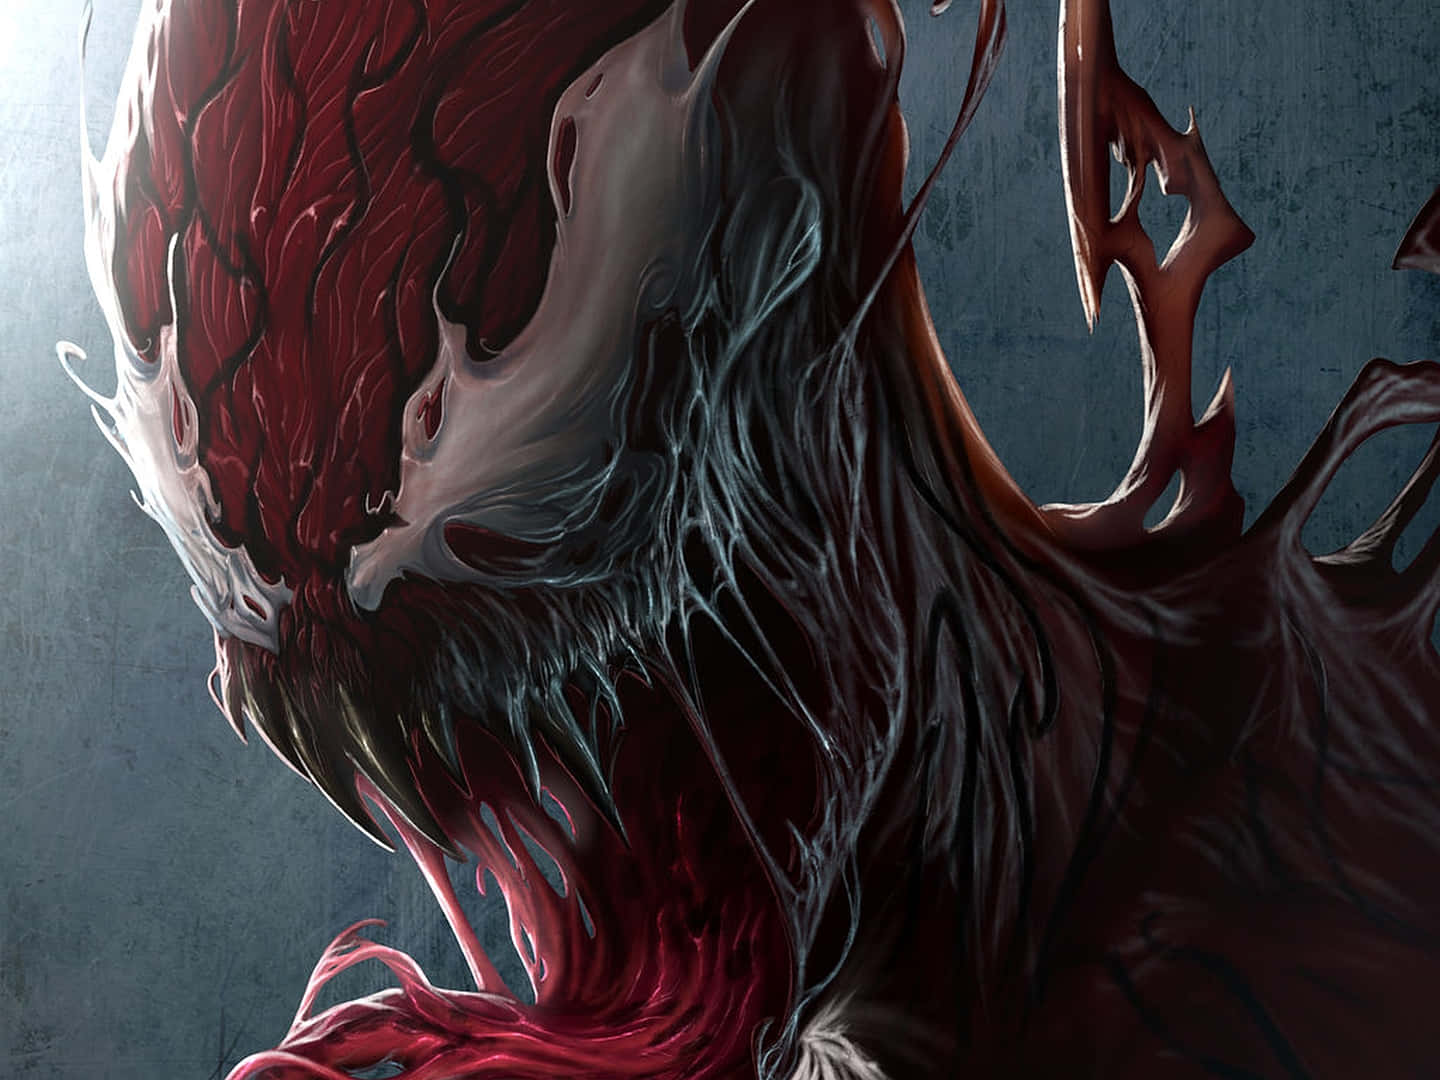 Carnage unleashes chaos in an intense and vivid display of power